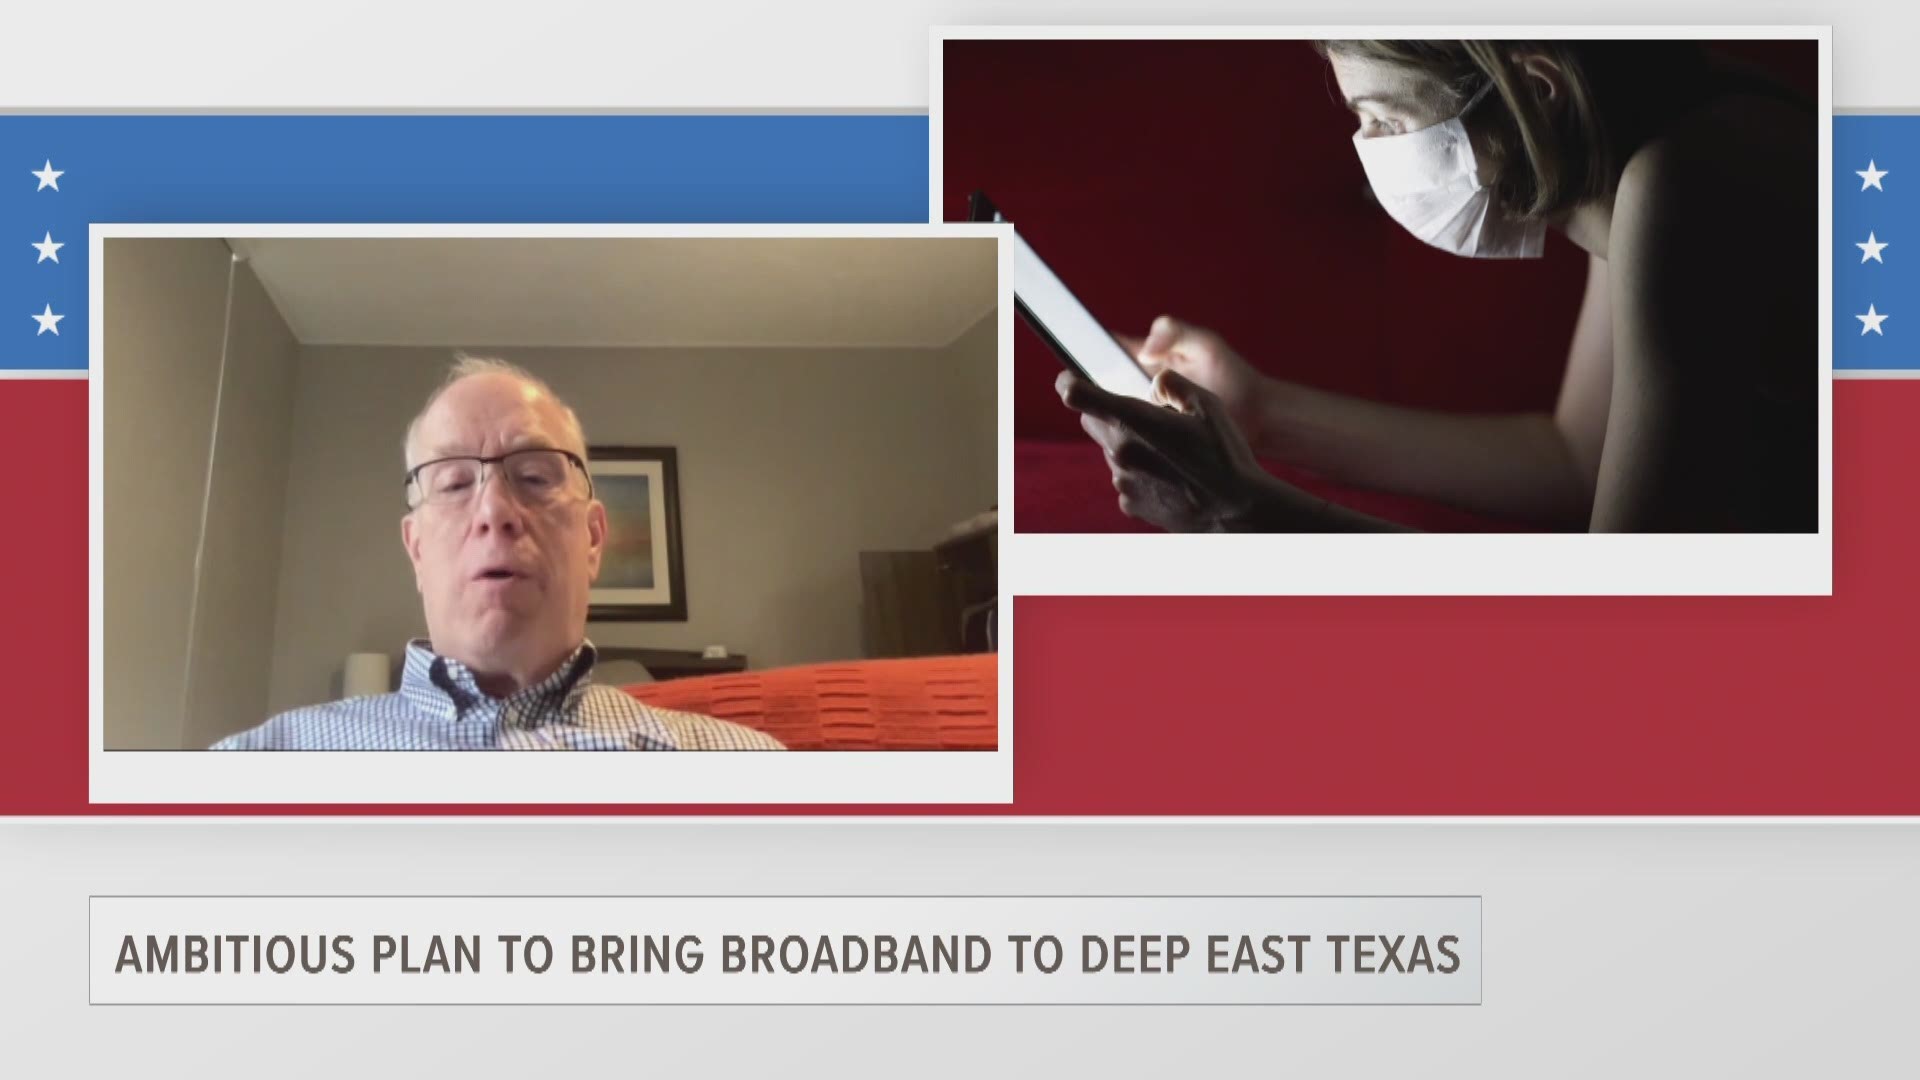 The executive director of the Deep East Texas Council of Governments discusses its bold plan to provide low-cost, high-speed internet access to the entire region